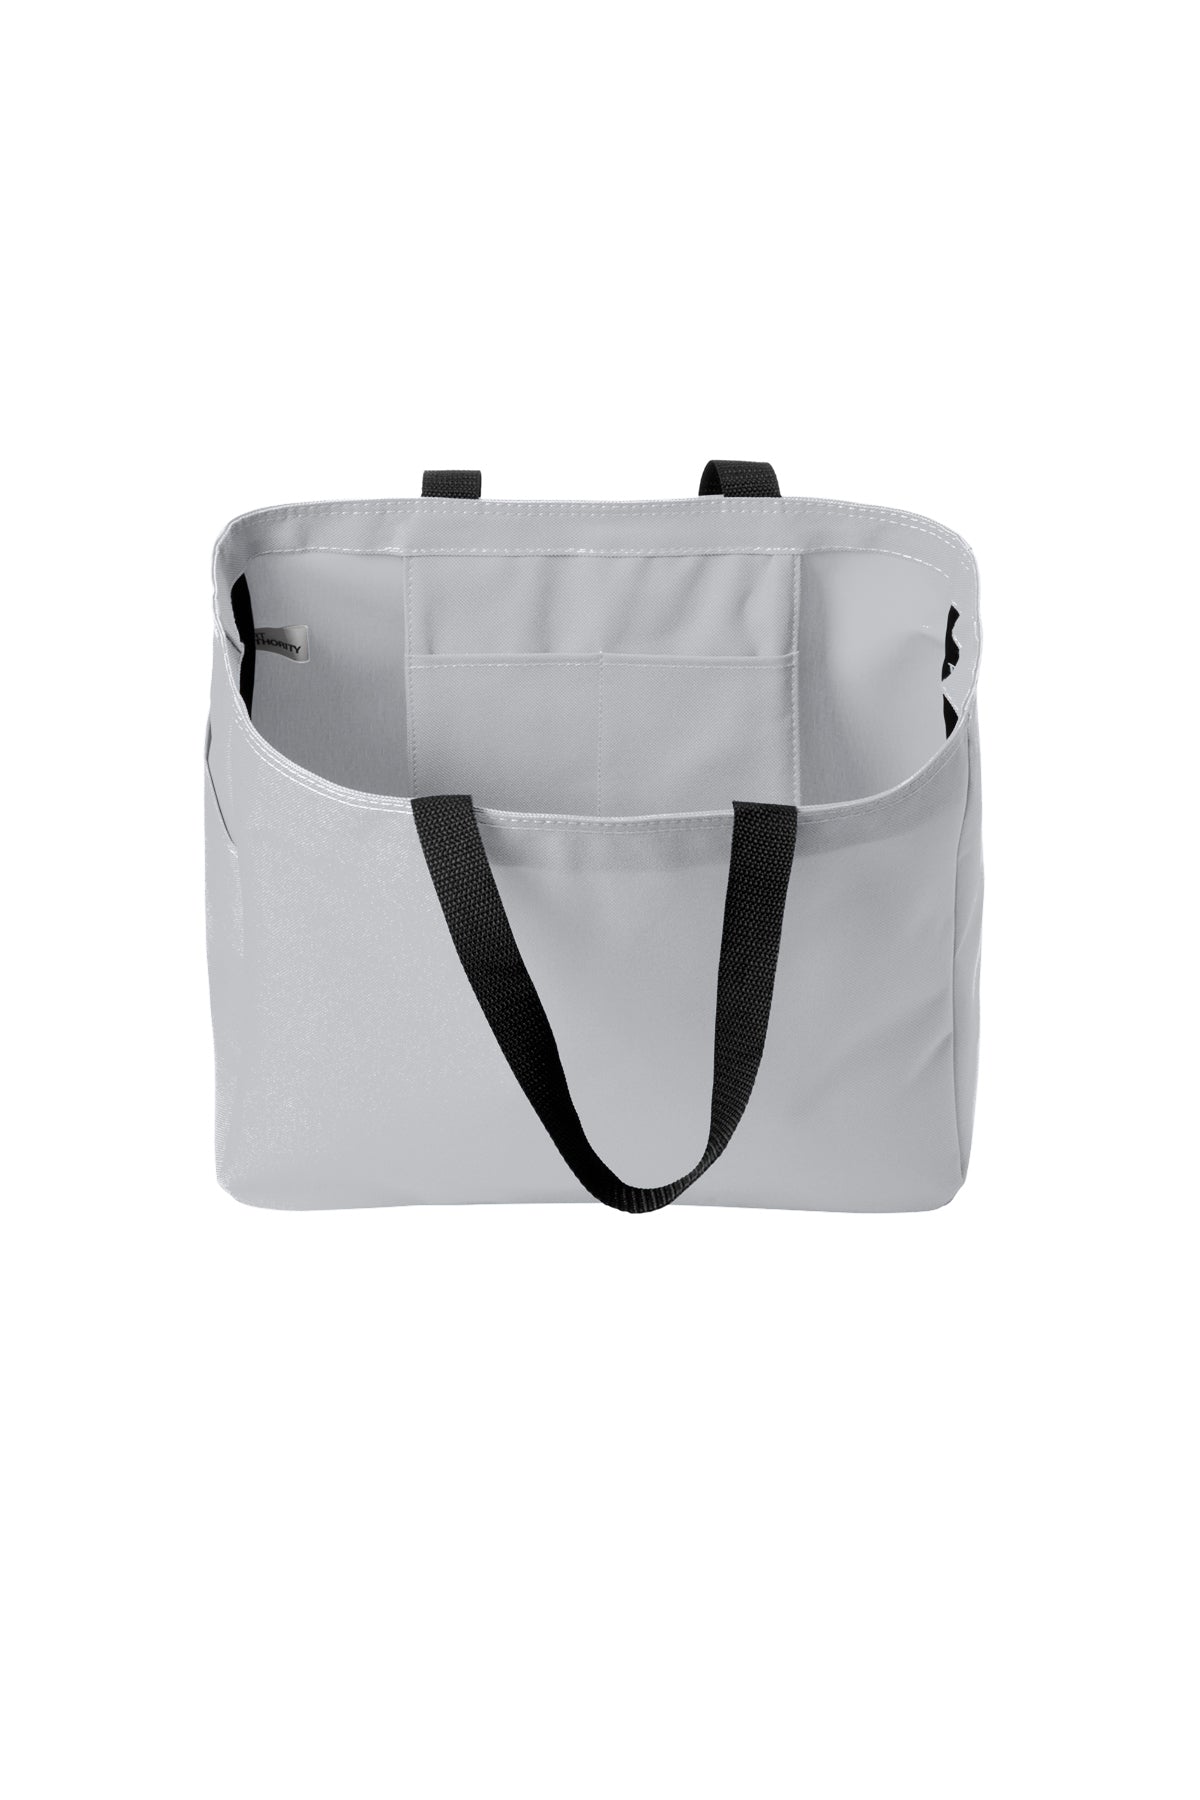 Port Authority - Essential Customized Tote, Chrome